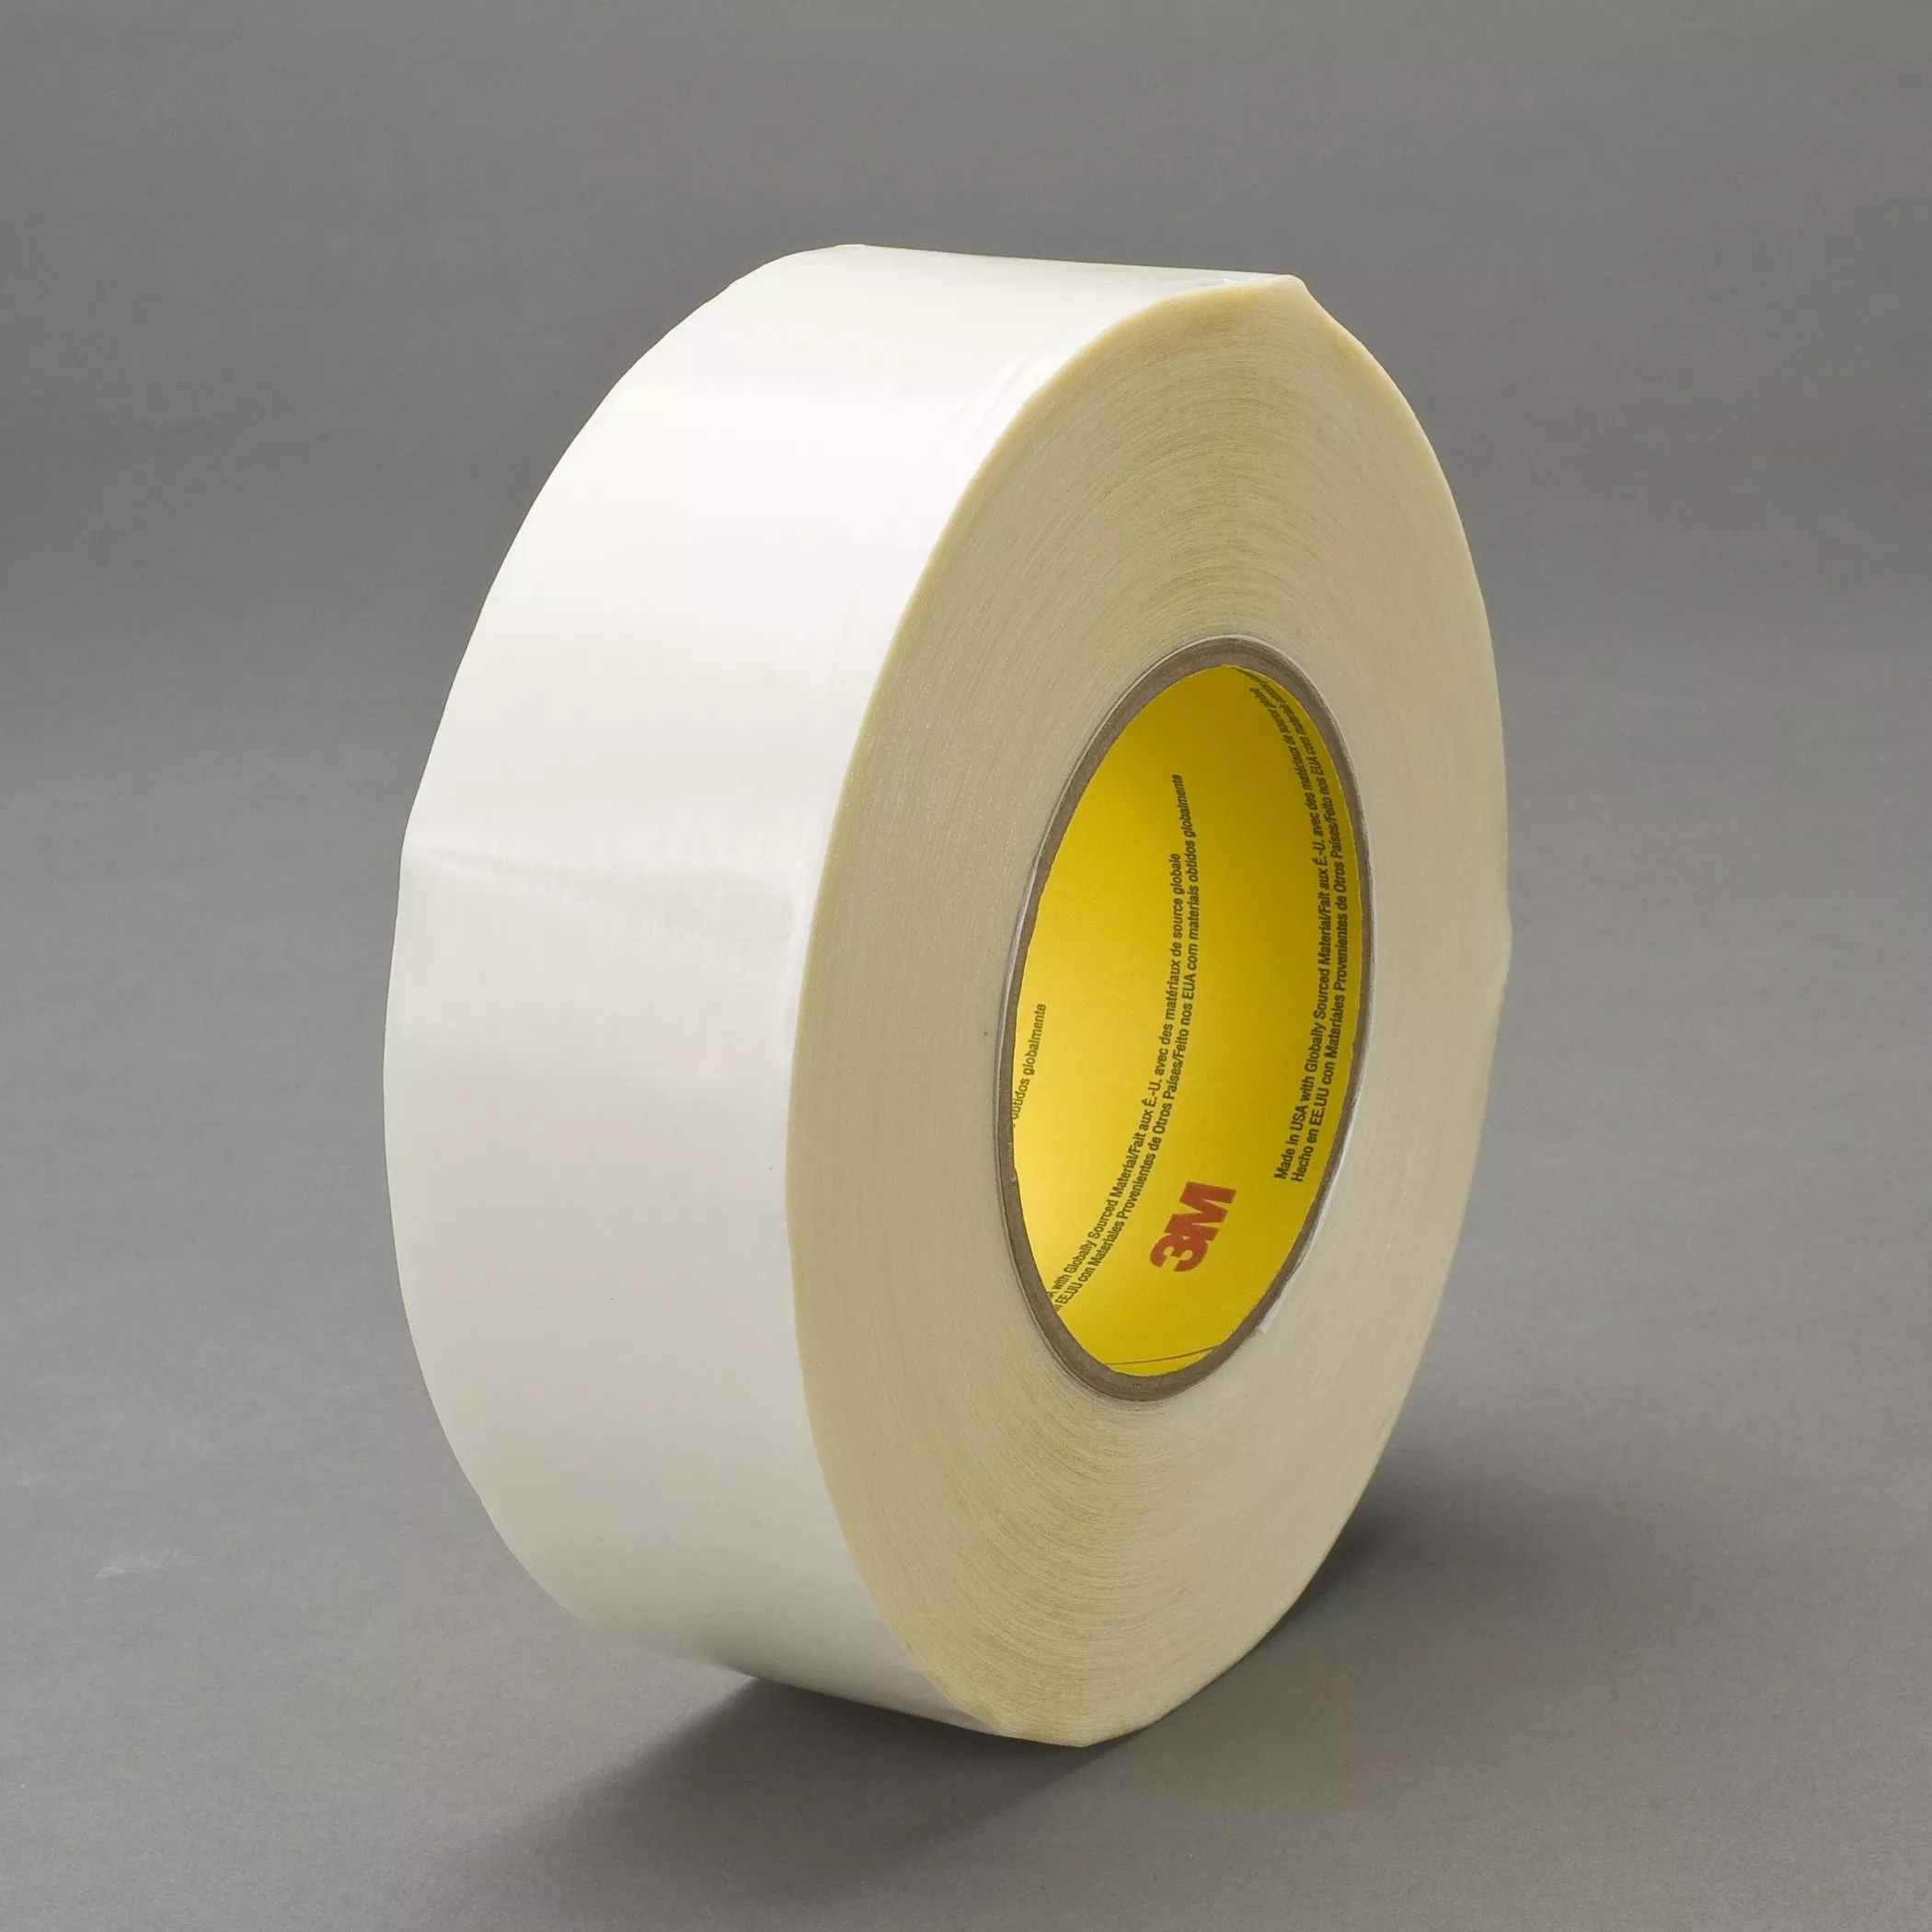 3M™ Double Coated Tape 9741, Clear, 36 mm x 55 m, 6.5 mil, 32 Roll/Case